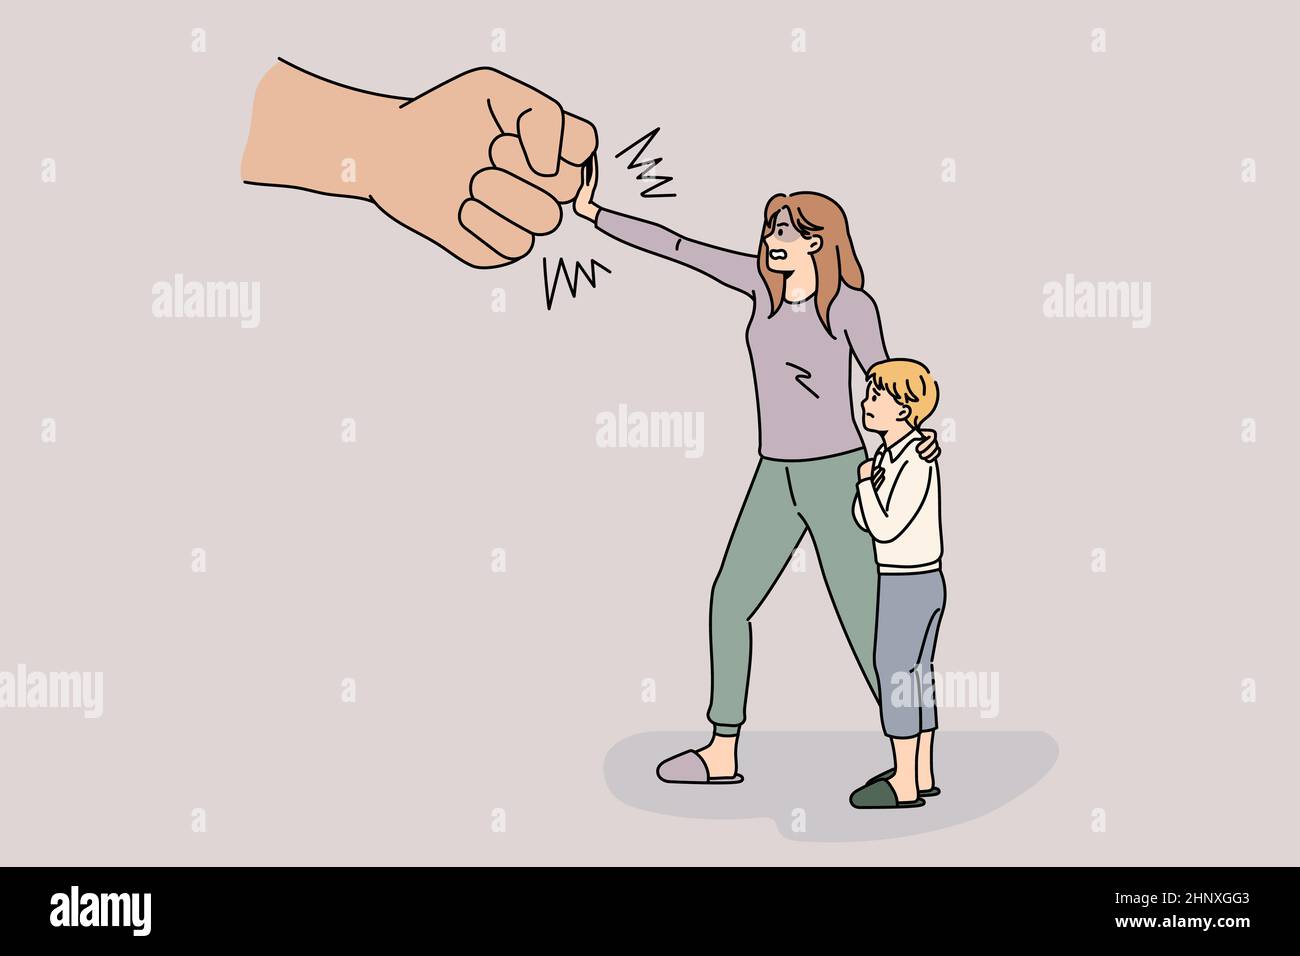 Stop harassment and bullying concept. Angry woman standing and defending herself and son from human hand fist fight bullying vector illustration Stock Photo